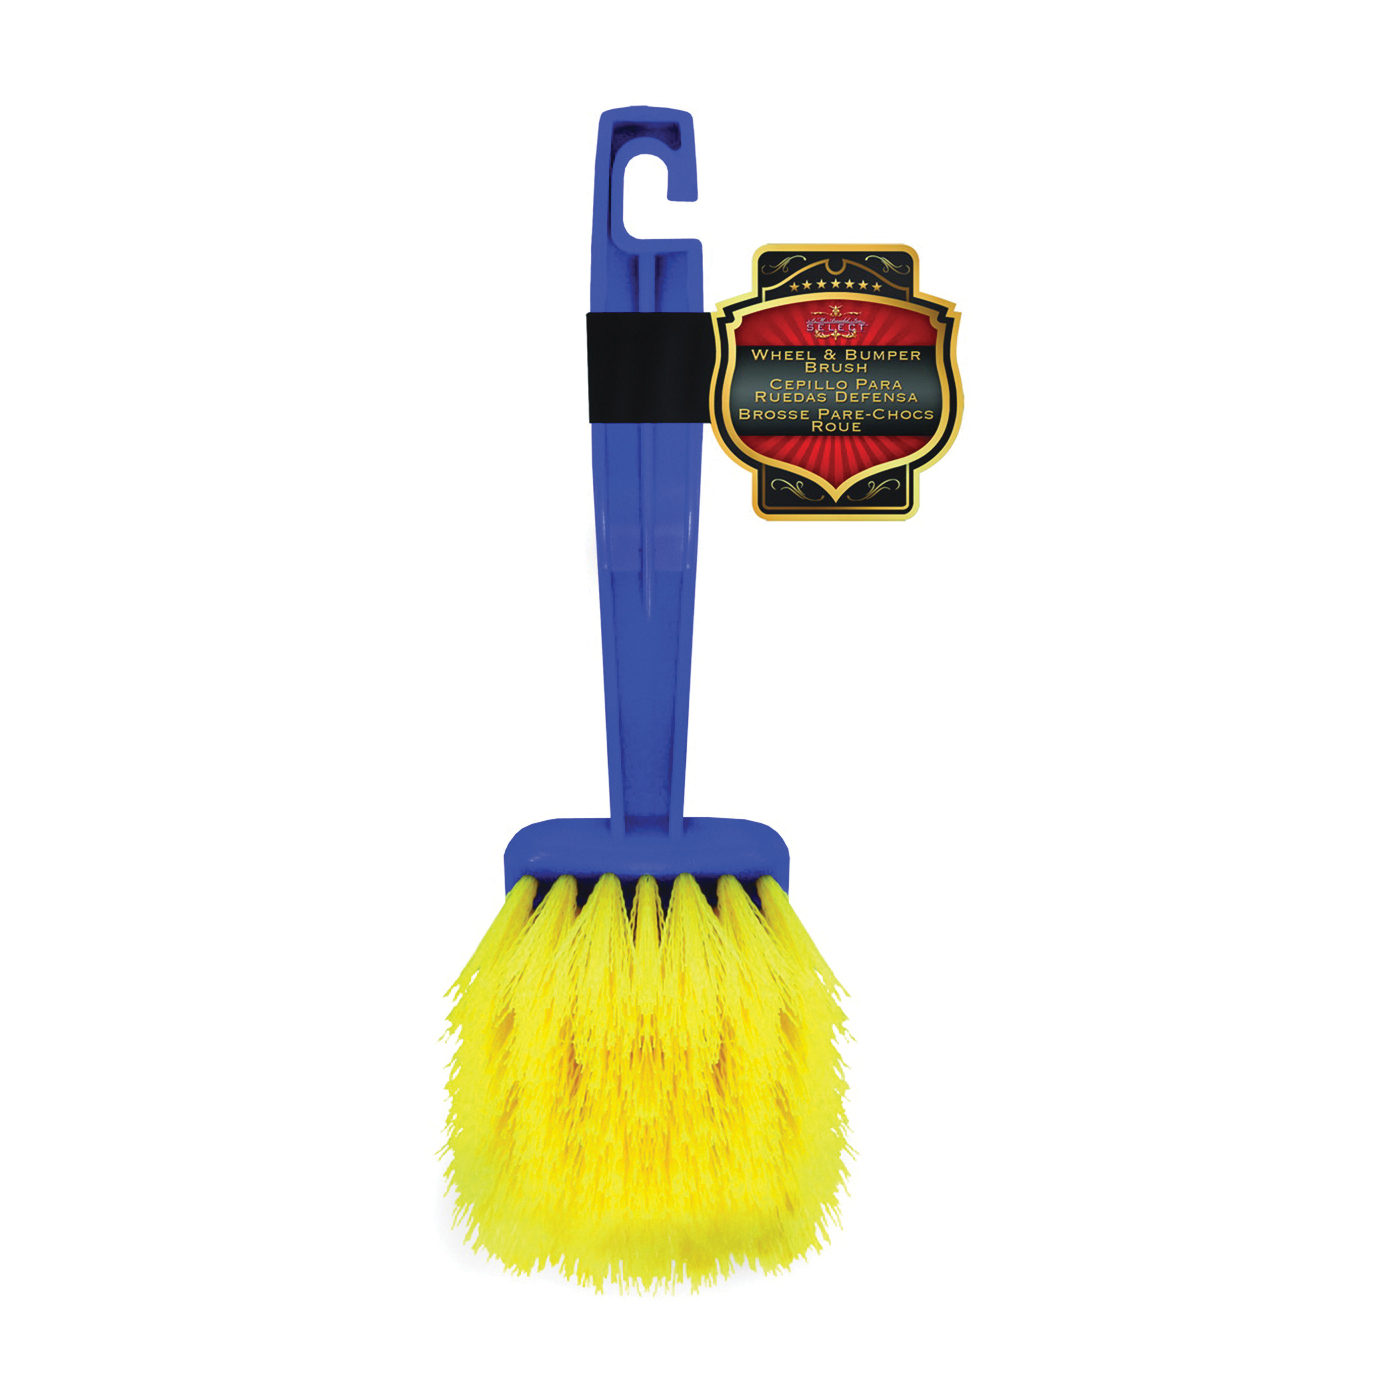 Sm Arnold SELECT 25-610 Wheel and Bumper Brush, 2 in L Trim, 9-1/2 in OAL, Polypropylene Trim, Plastic Handle - 1